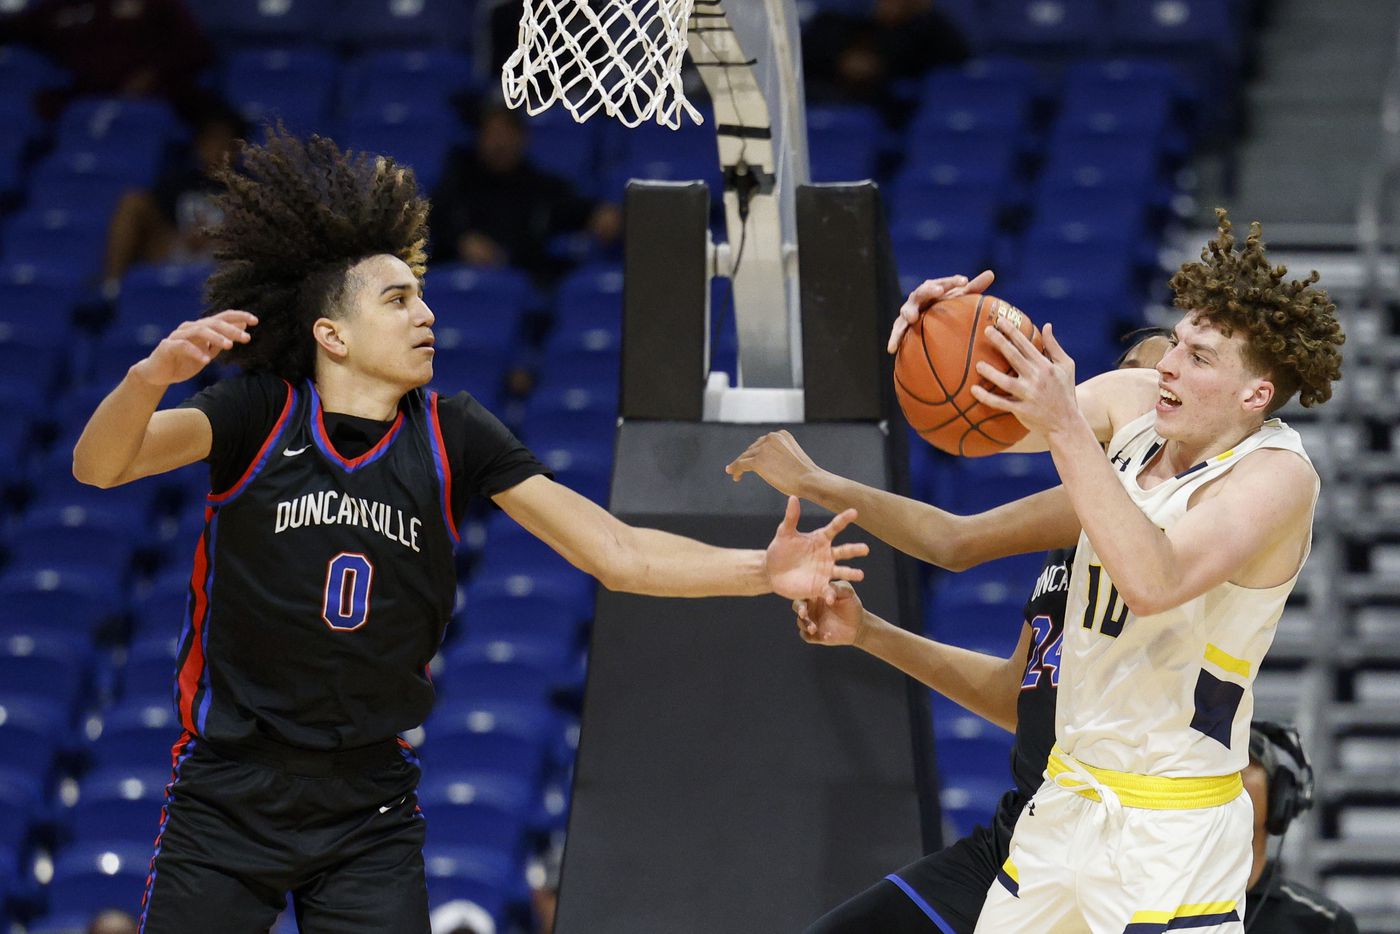 McKinney forward Thatcher McClure (10) collects a rebound ahead of Duncanville guard Anthony...